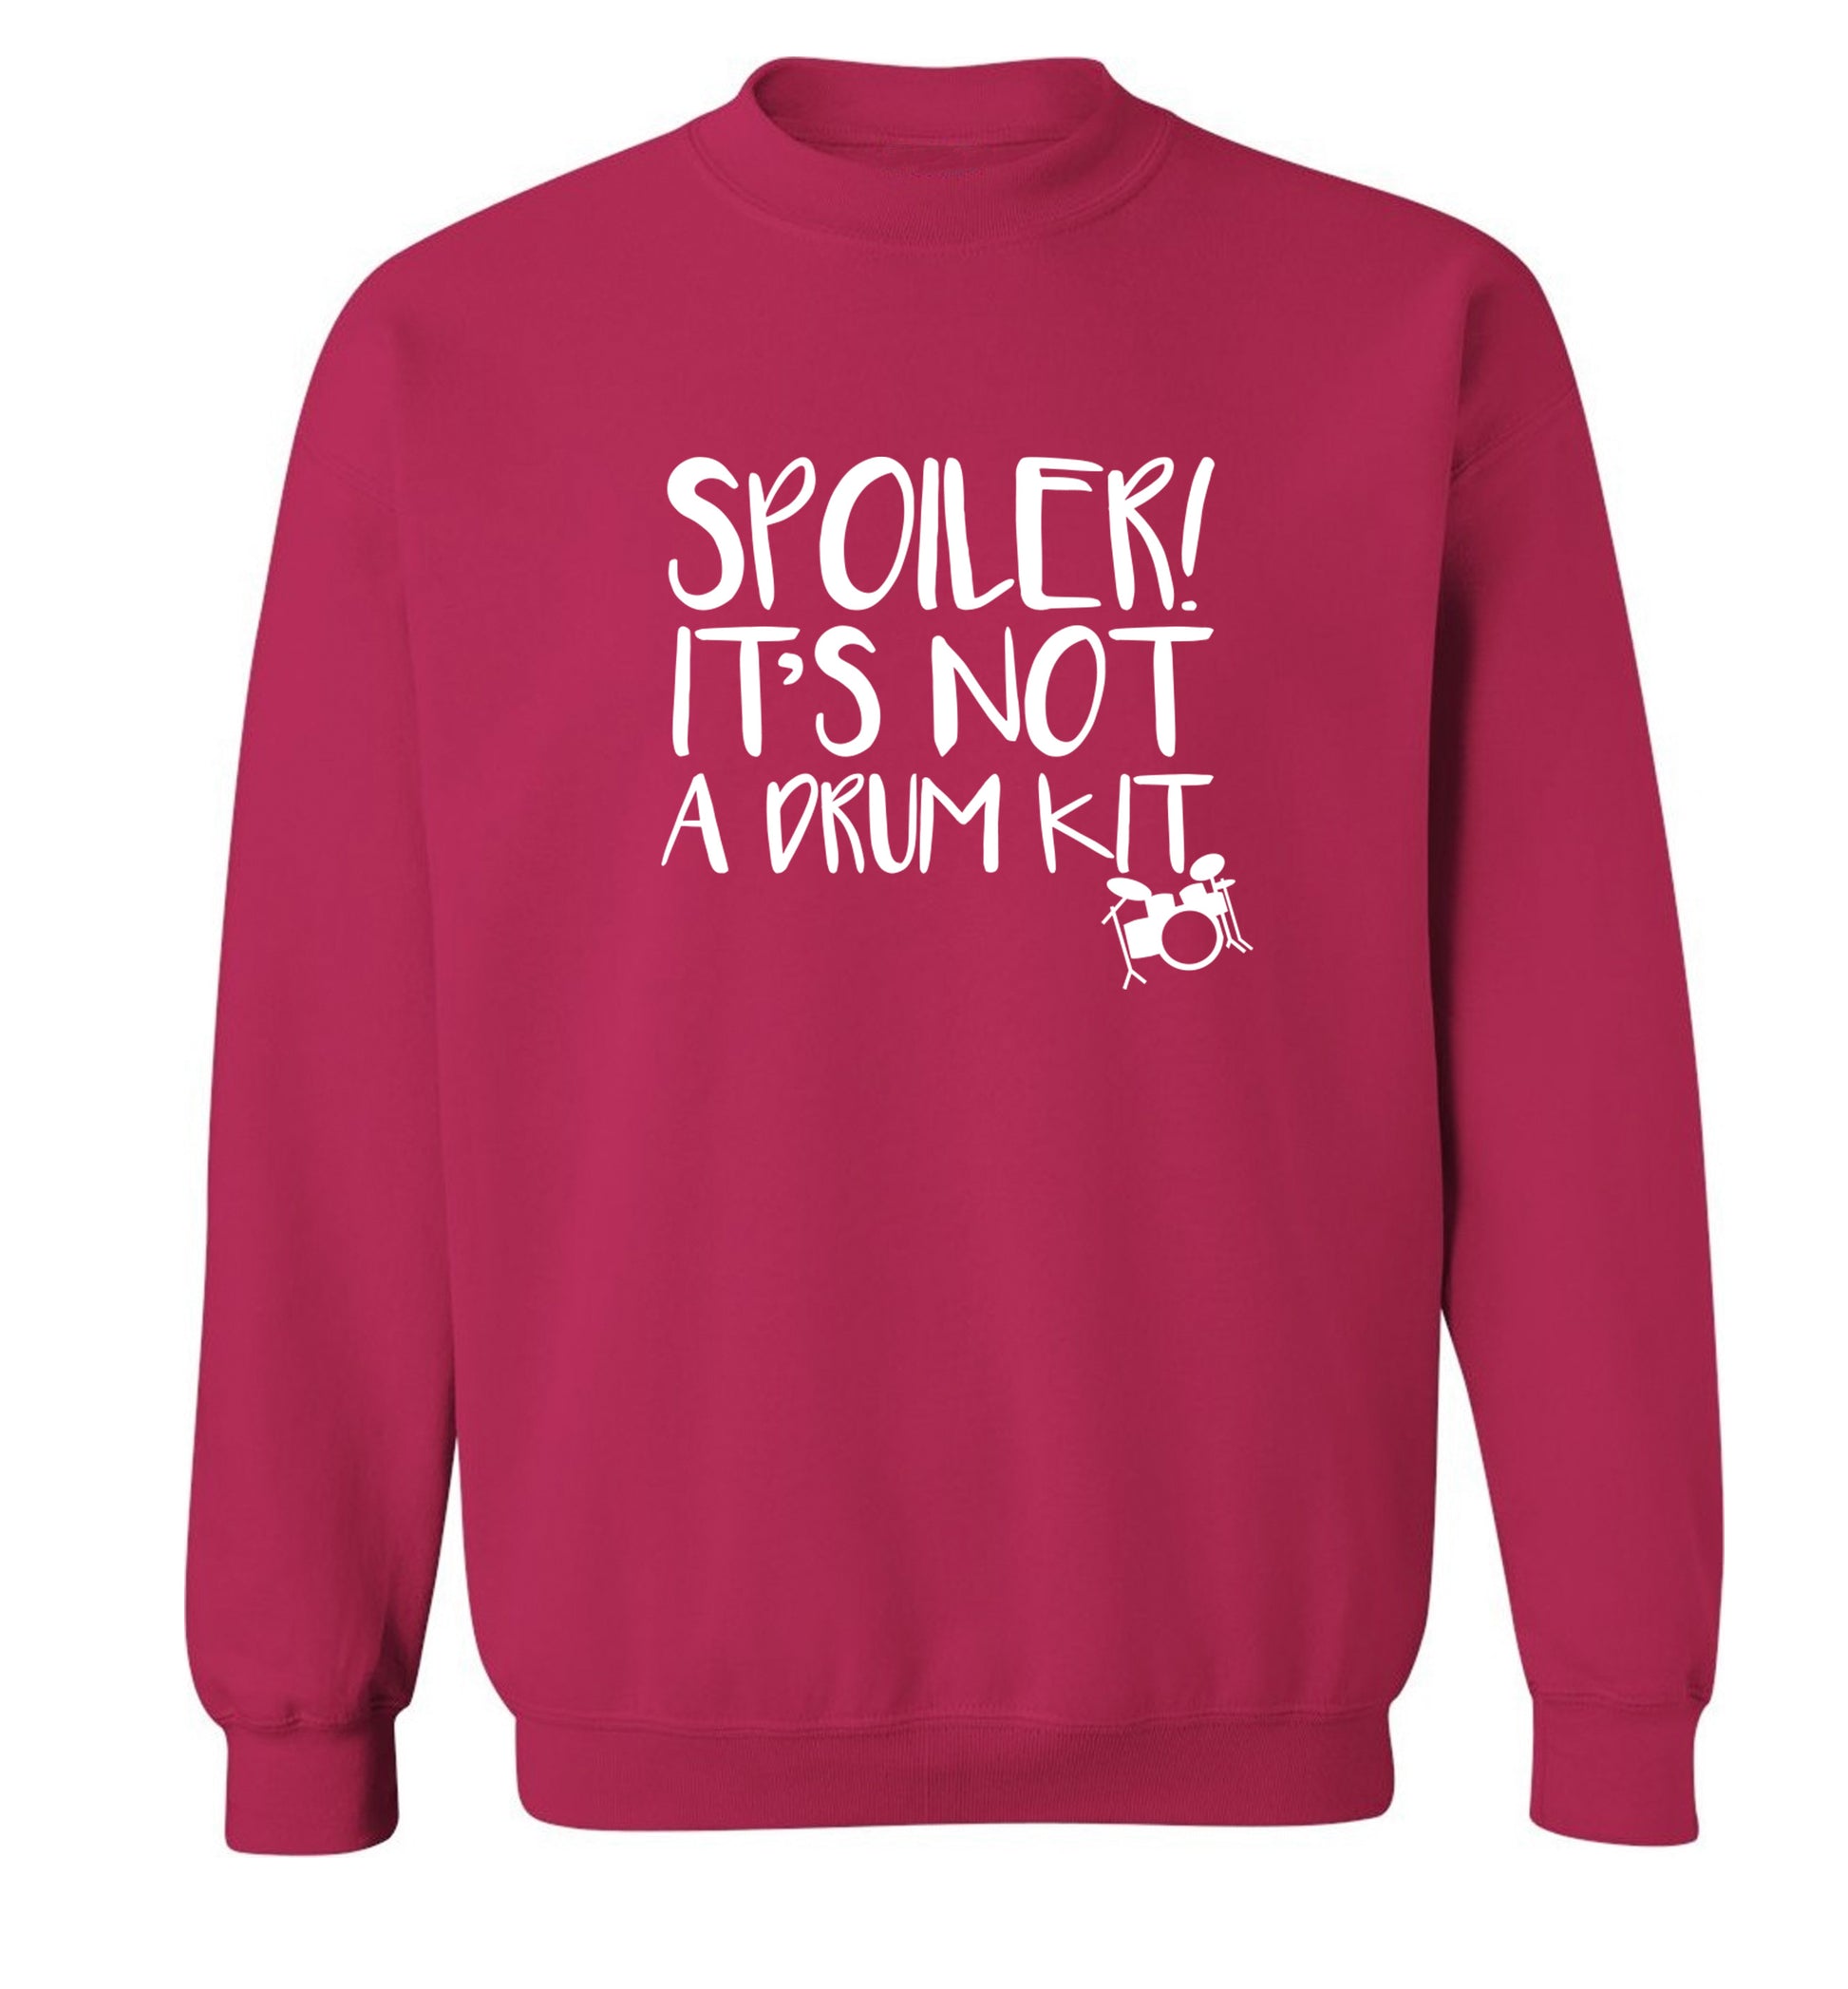 Spoiler it's not a drum kit Adult's unisex pink Sweater 2XL